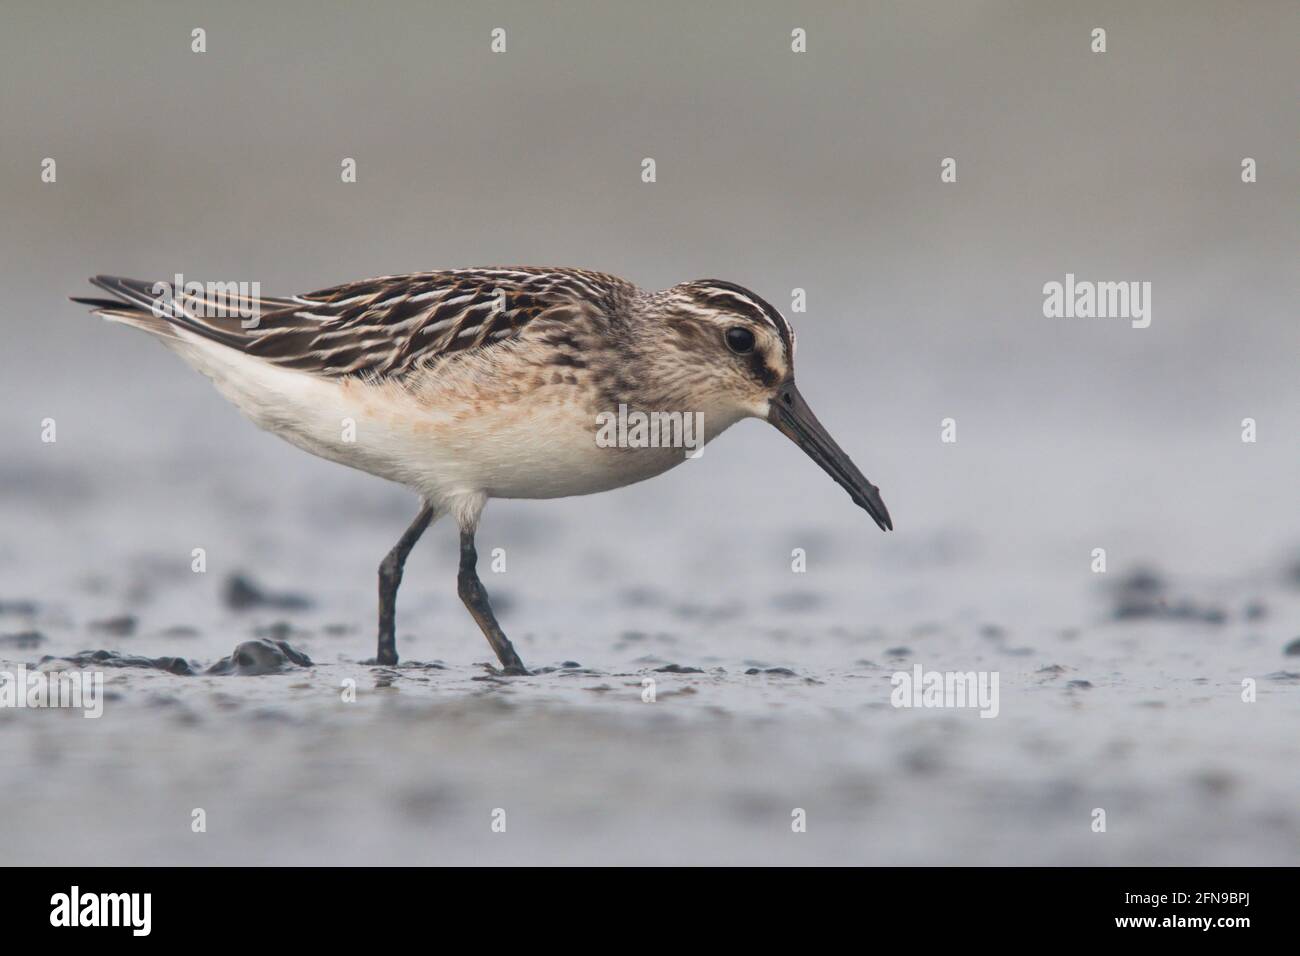 Broad-billed sandpiper searching for food on a pond bed Stock Photo